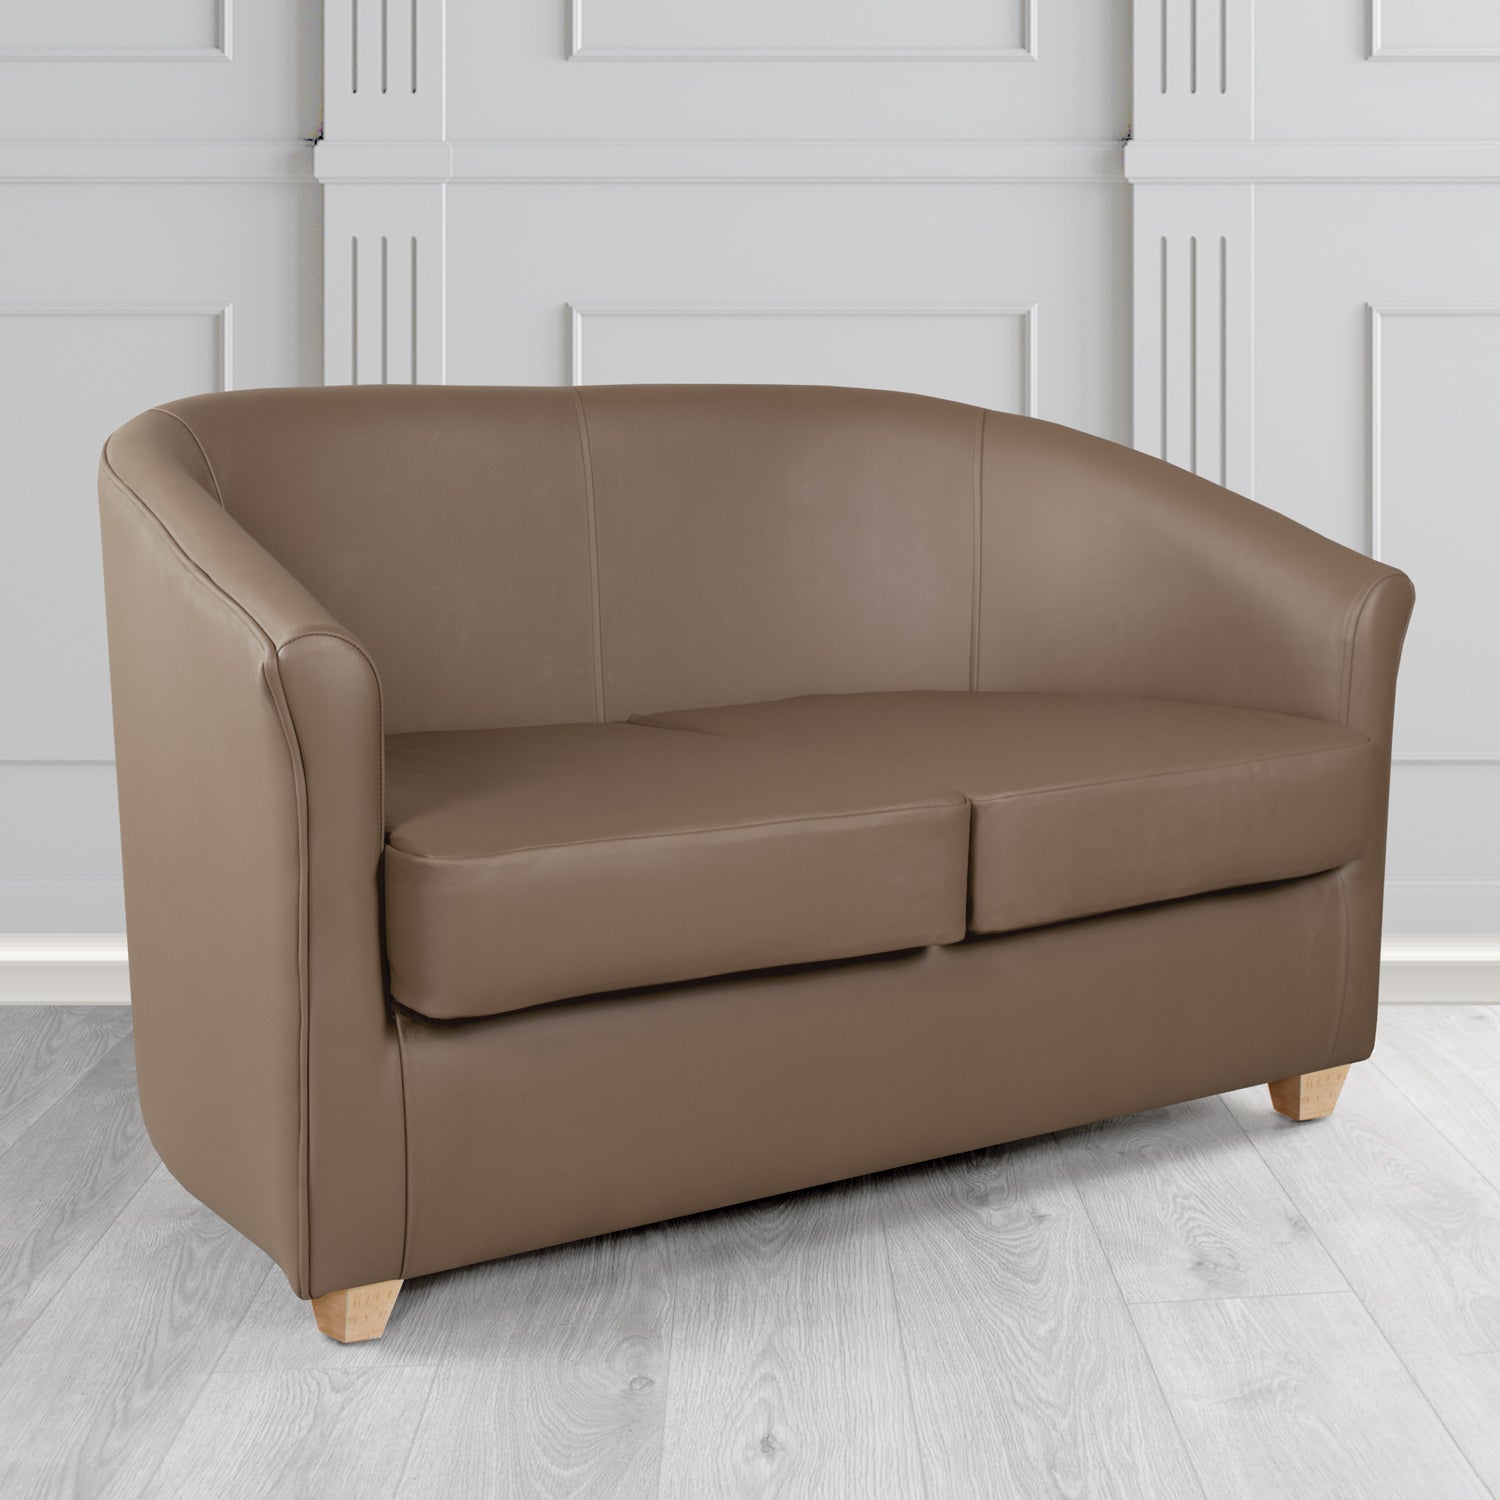 Cannes 2 Seater Tub Sofa in Just Colour Pecan Crib 5 Faux Leather - The Tub Chair Shop